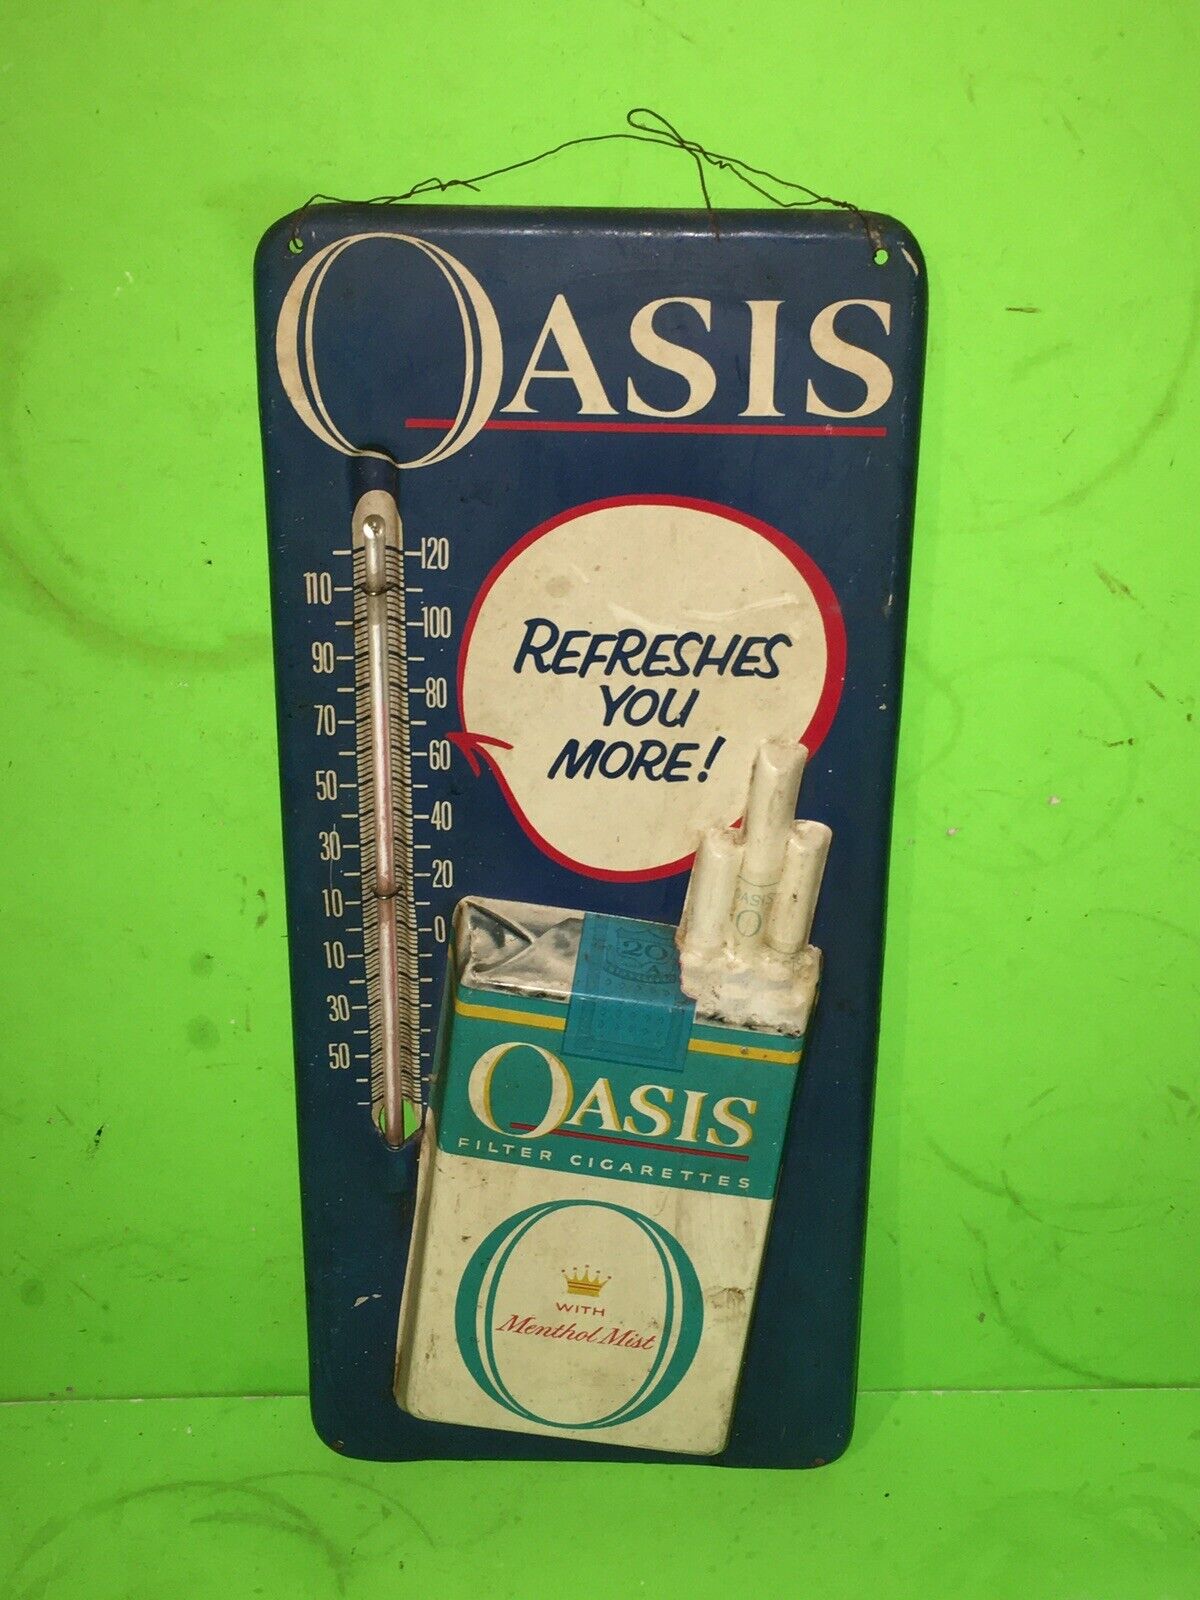 Vintage OASIS CIGARETTES Advertising Tobacco Working Thermometer